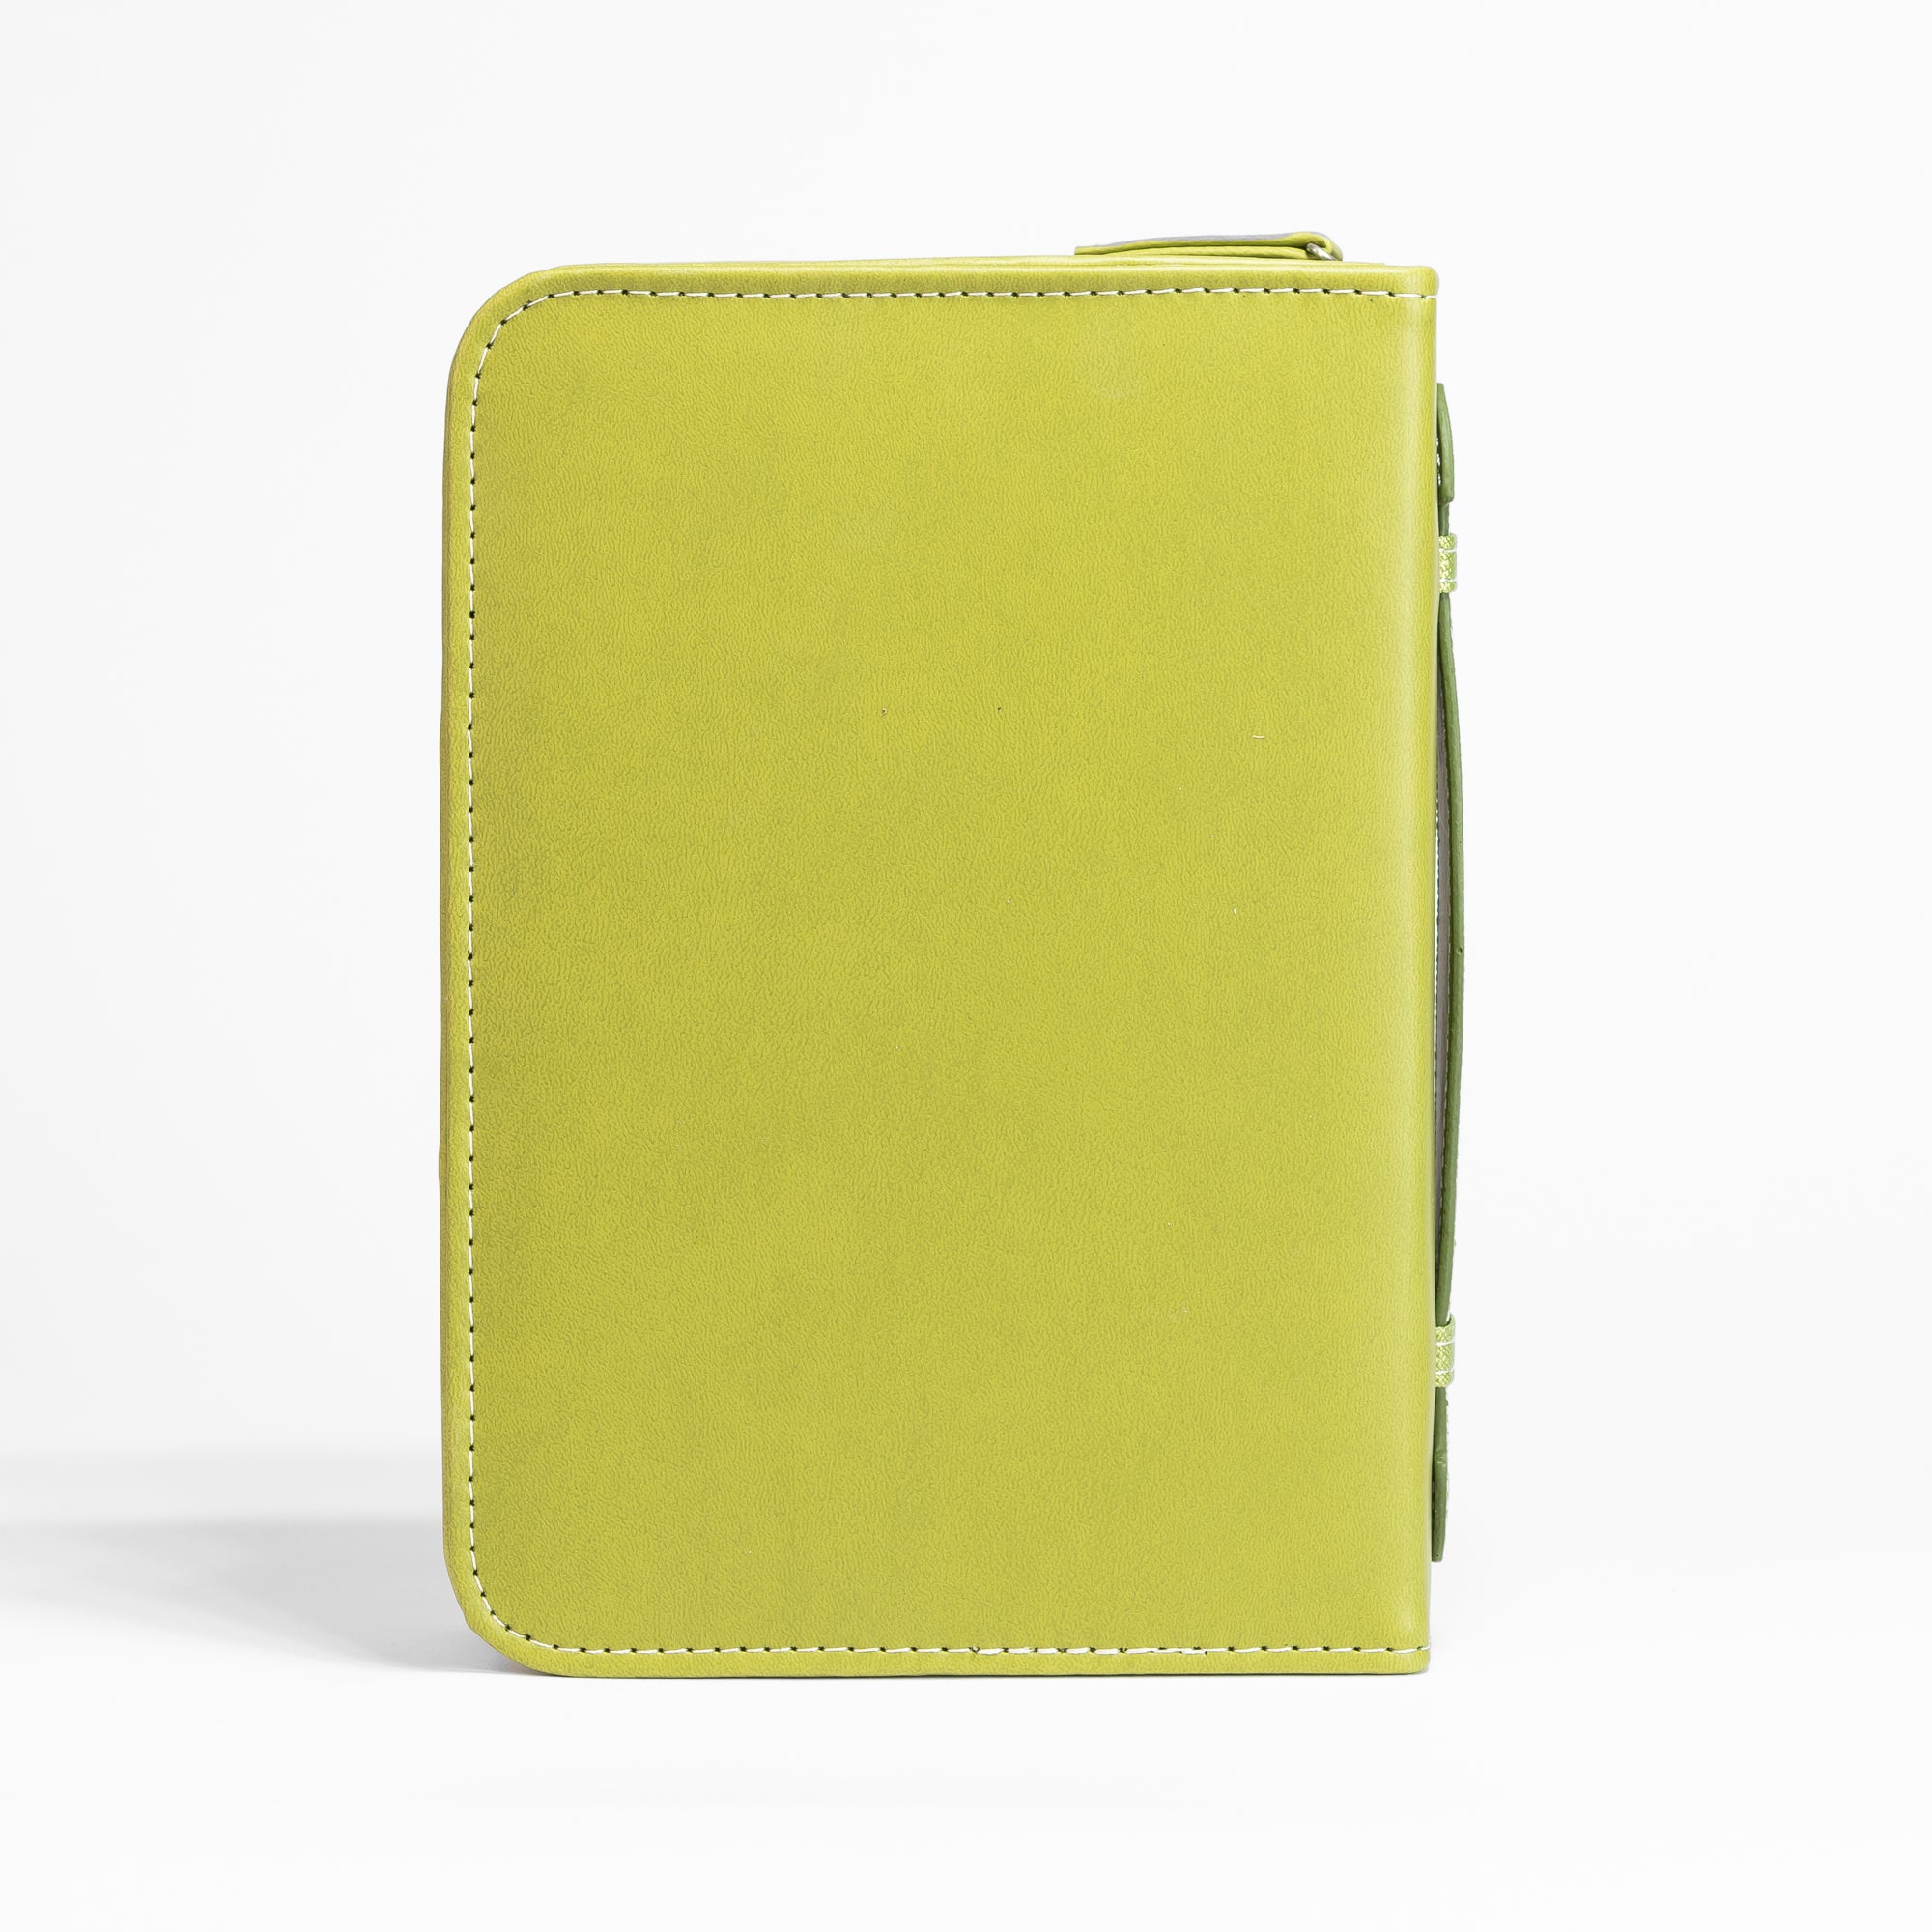 Divine Details: Green On Green - Blessed Bible Cover